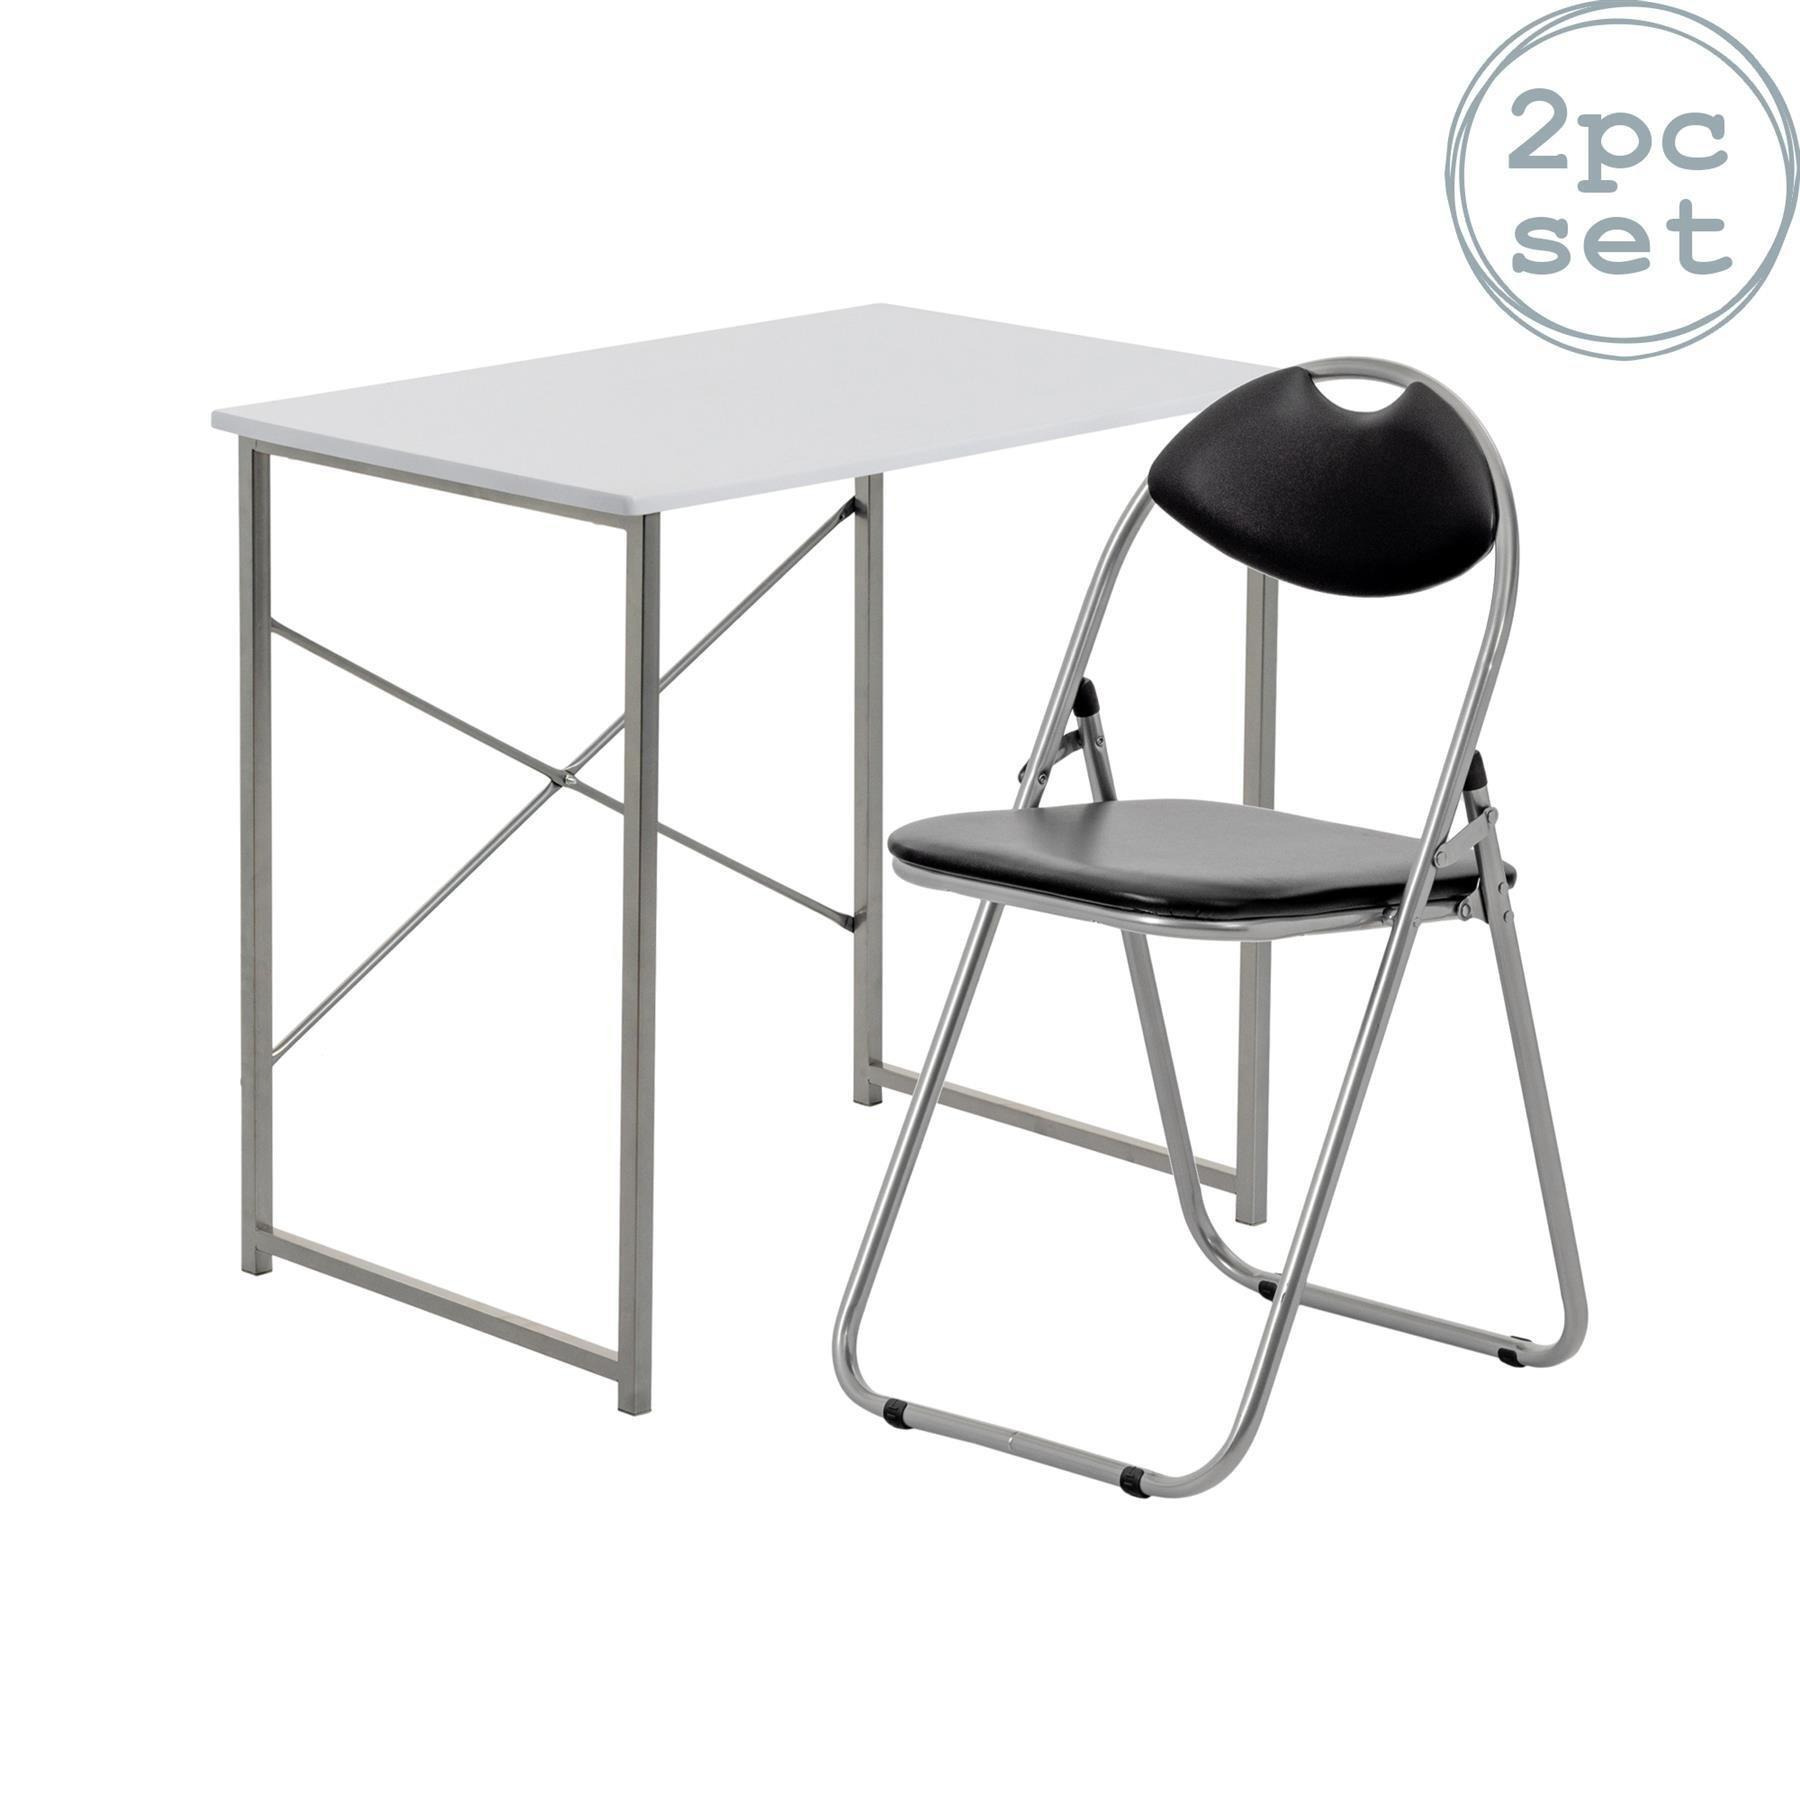 Industrial Office Desk & Chair Set - image 1